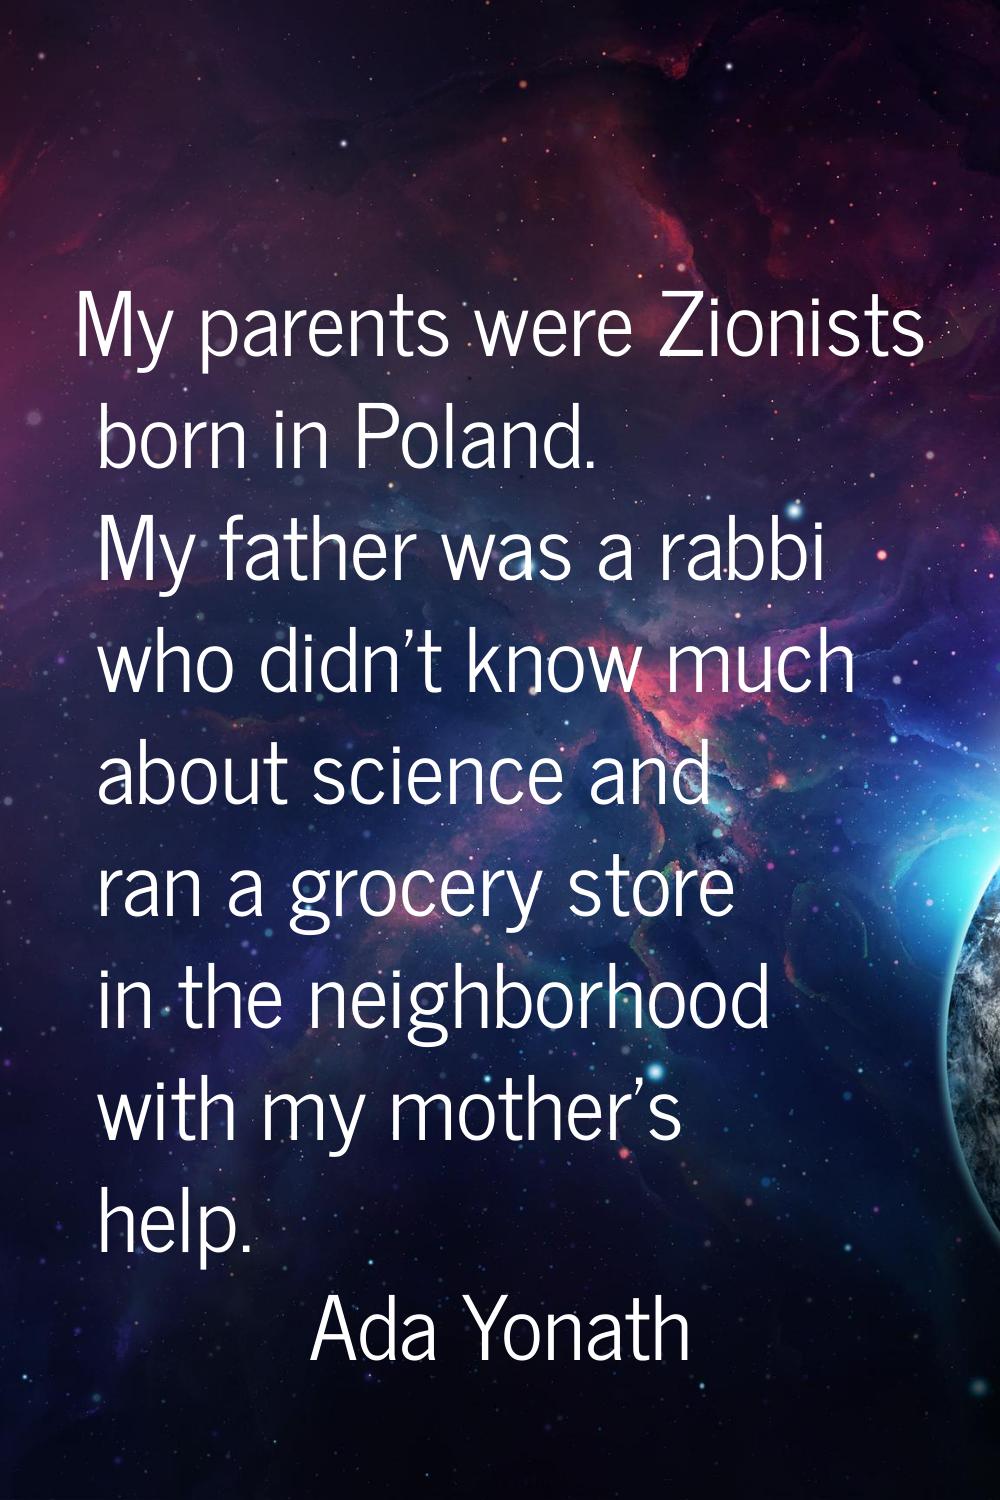 My parents were Zionists born in Poland. My father was a rabbi who didn't know much about science a